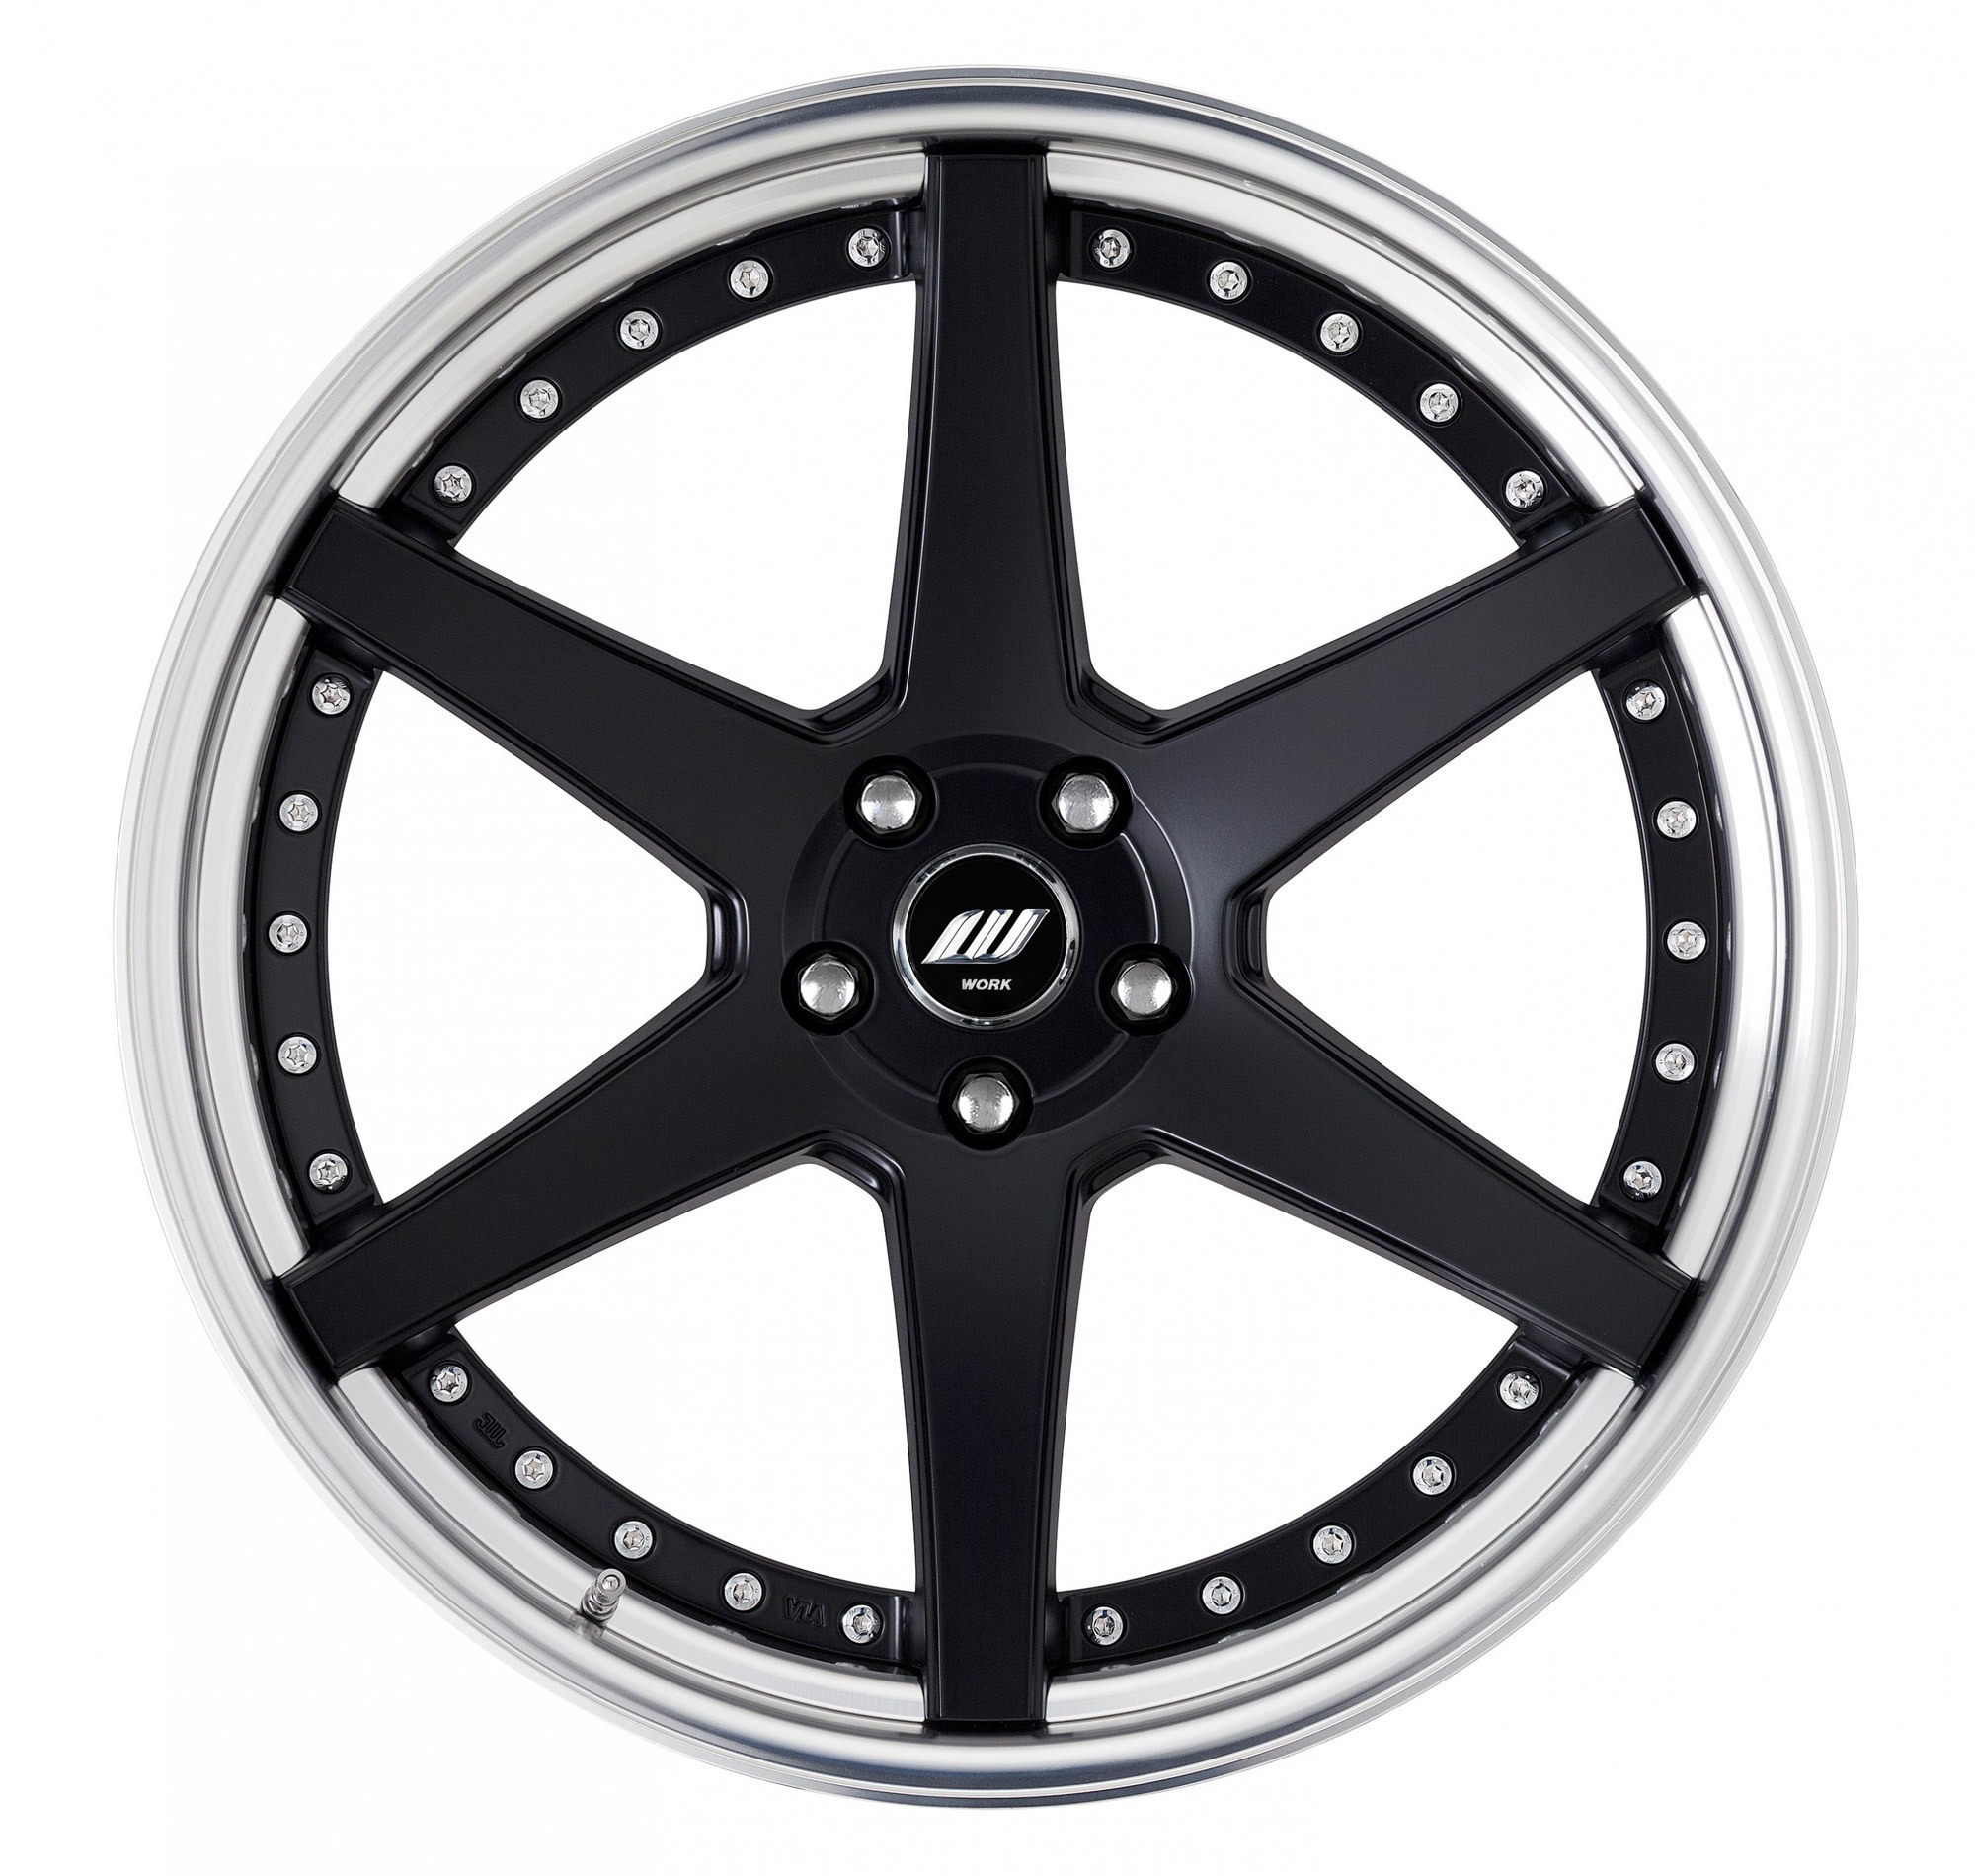 images-products-1-8131-233004995-WORK-XTRAP-ST1-MAT-BLACKMBLDEEP-CONCAVE.jpg